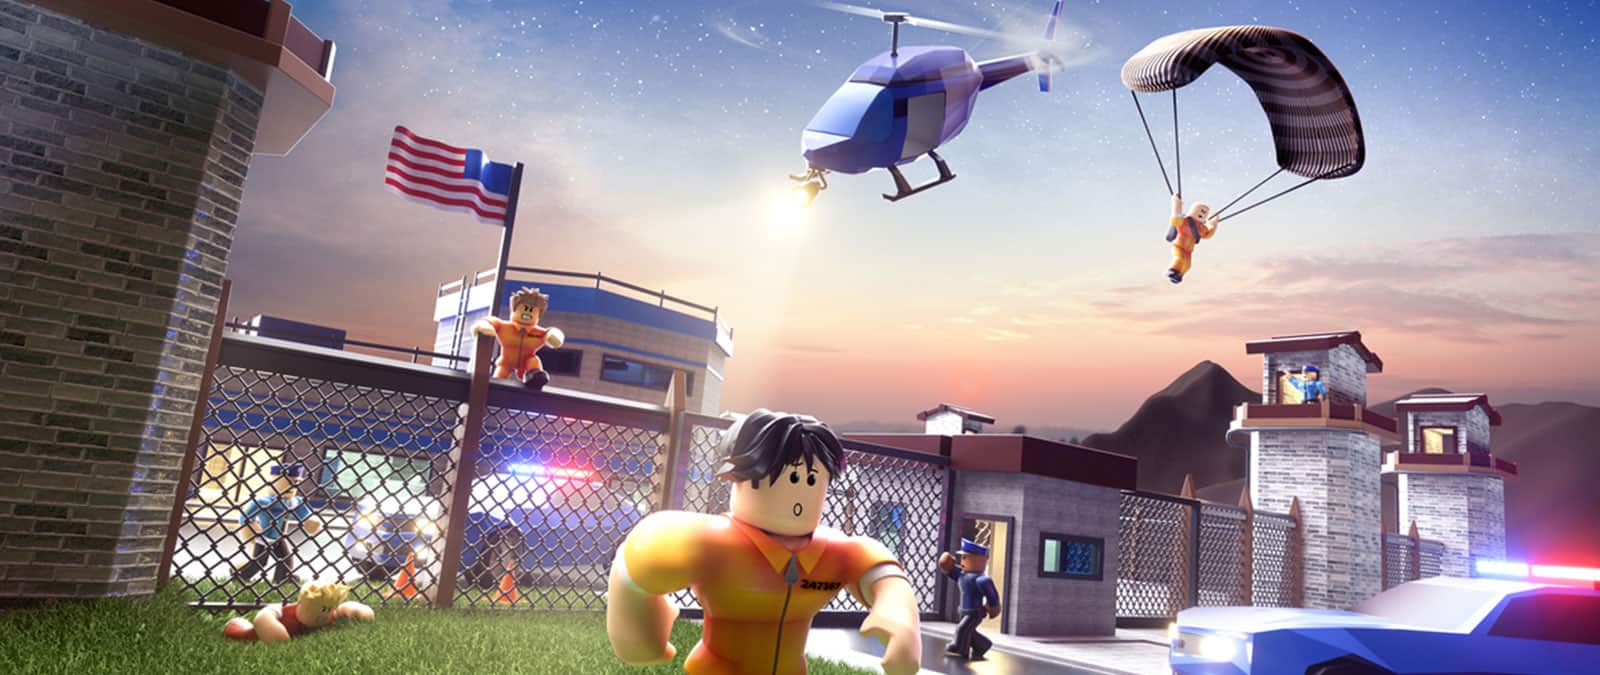 Race against the clock or challenge friends to exhilarating races in this fast-paced Roblox game